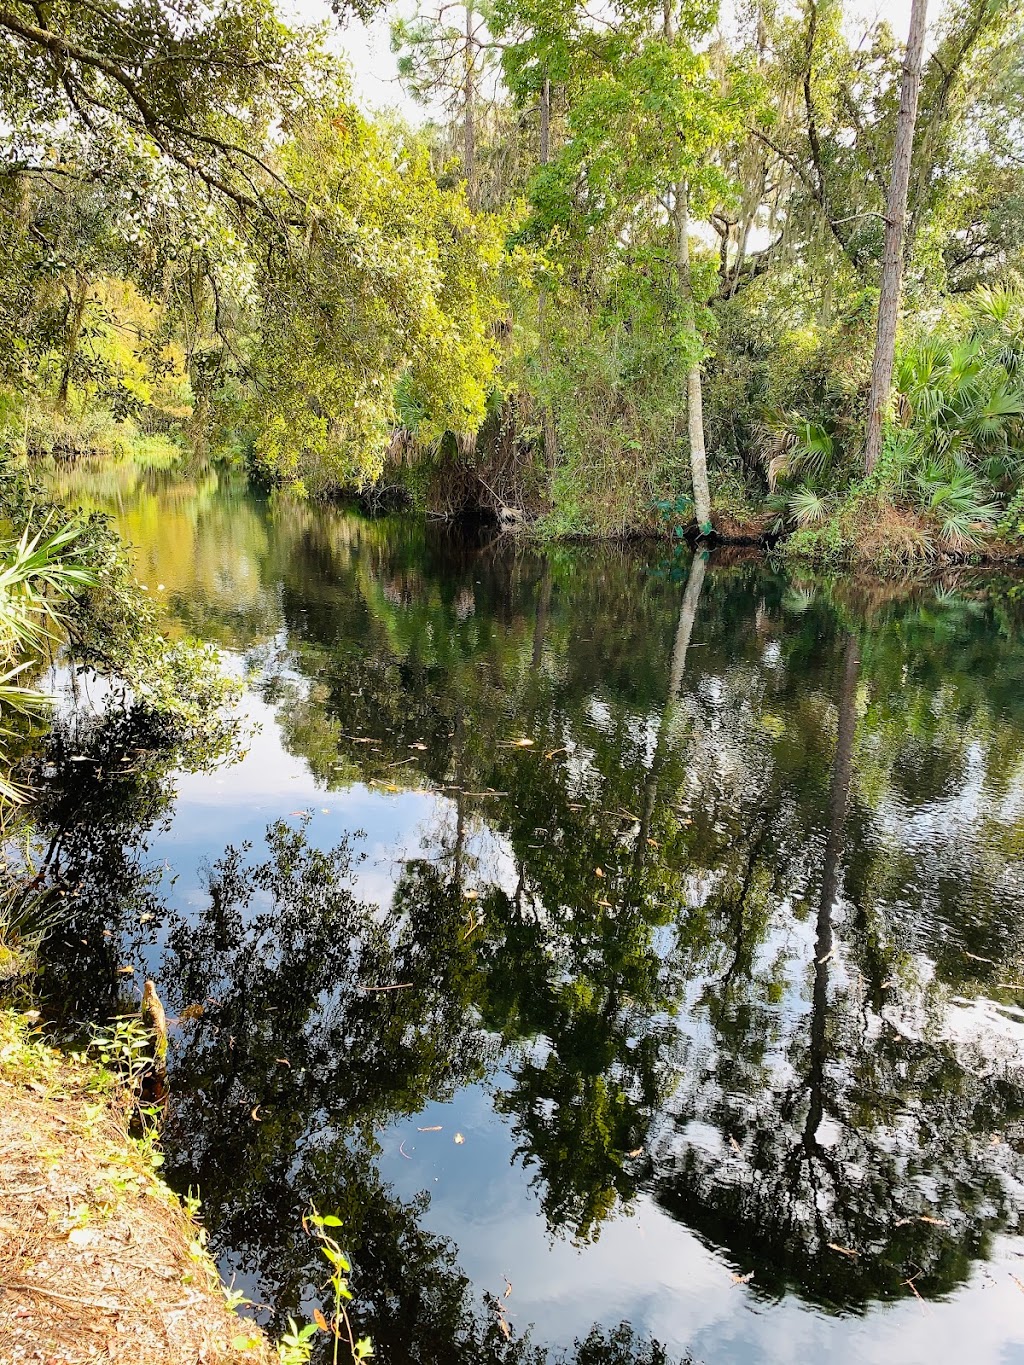 Parks & Conservation Resource | 2200 E Lake Rd S, Palm Harbor, FL 34685 | Phone: (727) 582-2100